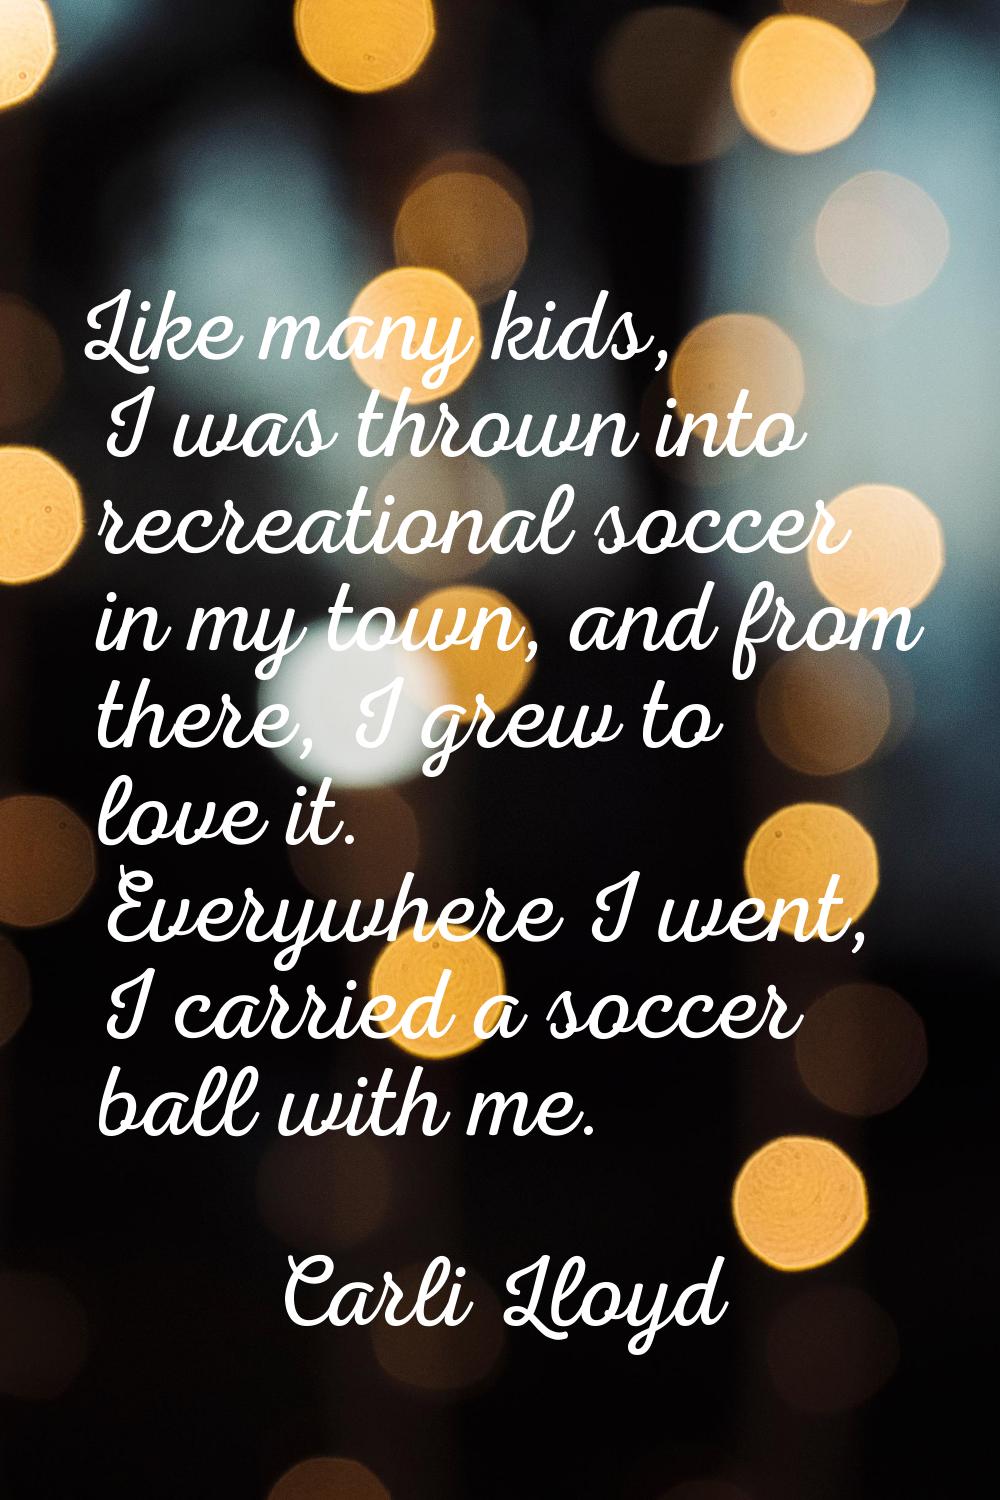 Like many kids, I was thrown into recreational soccer in my town, and from there, I grew to love it